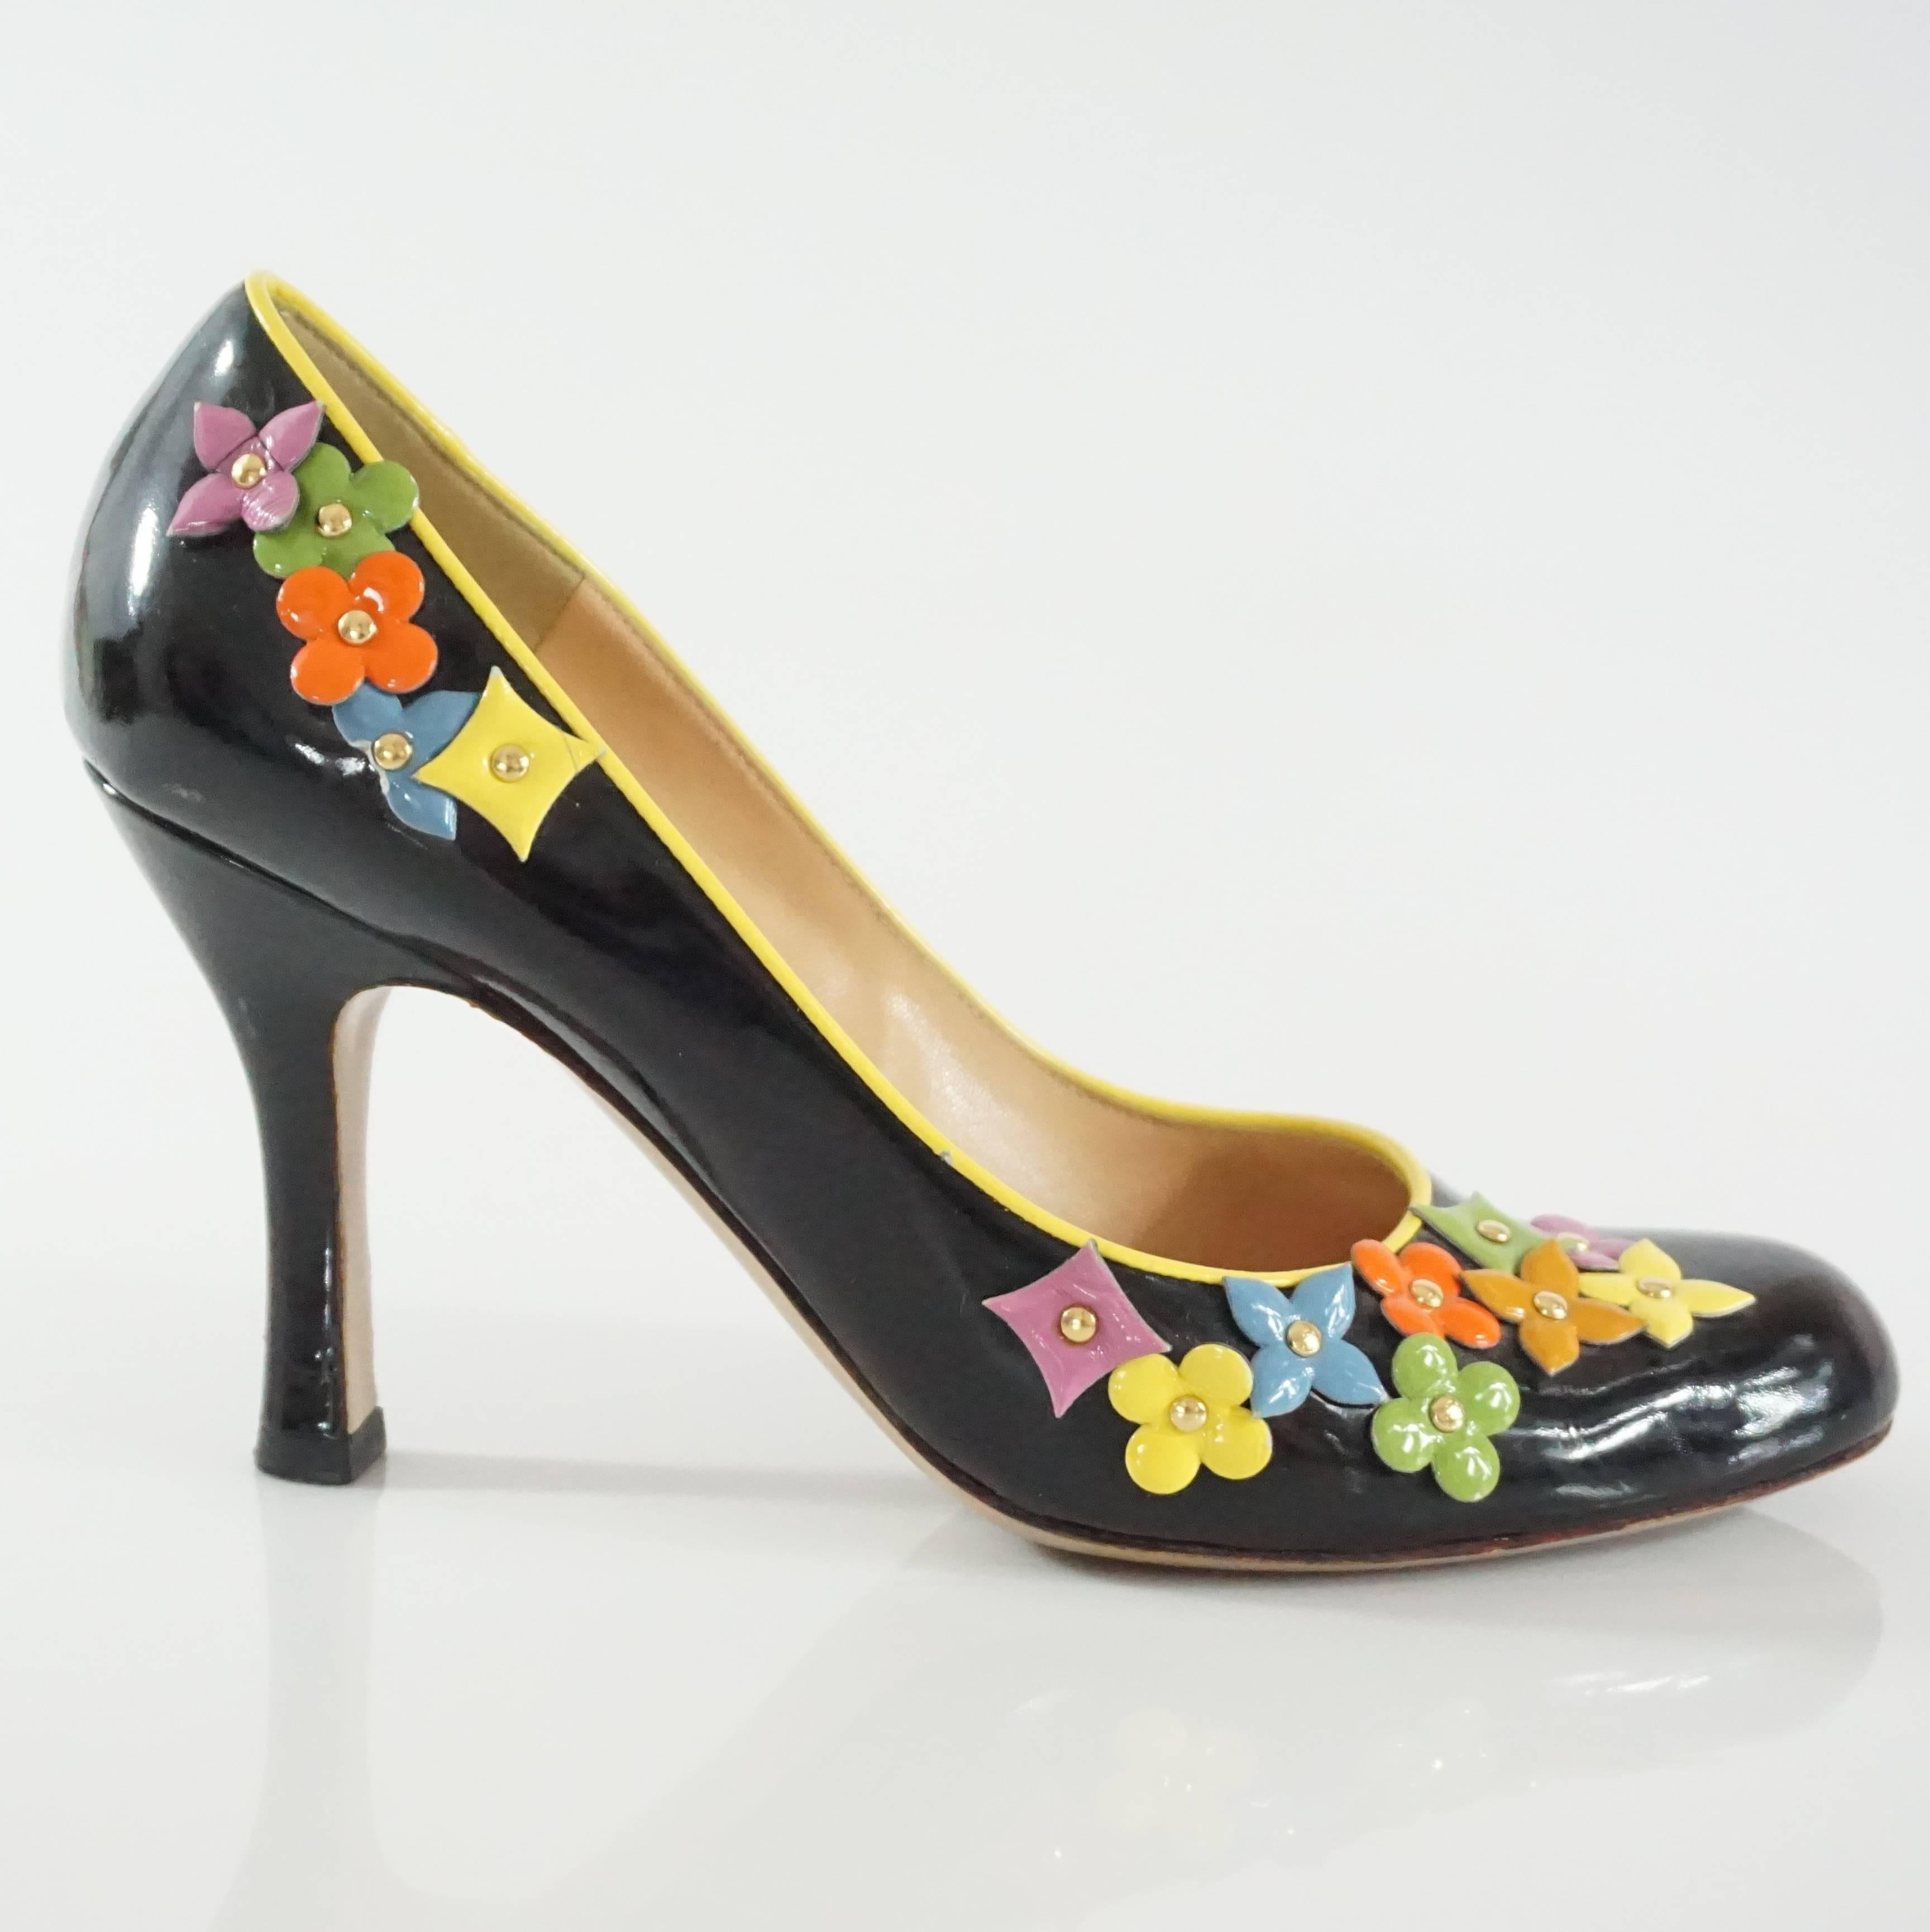 These Louis Vuitton black patent pumps have the signature multi color flowers all over with a yellow trim. They are in fair condition with some wear on the patent and one piece of the flower missing as indicated by the images. Size 36.